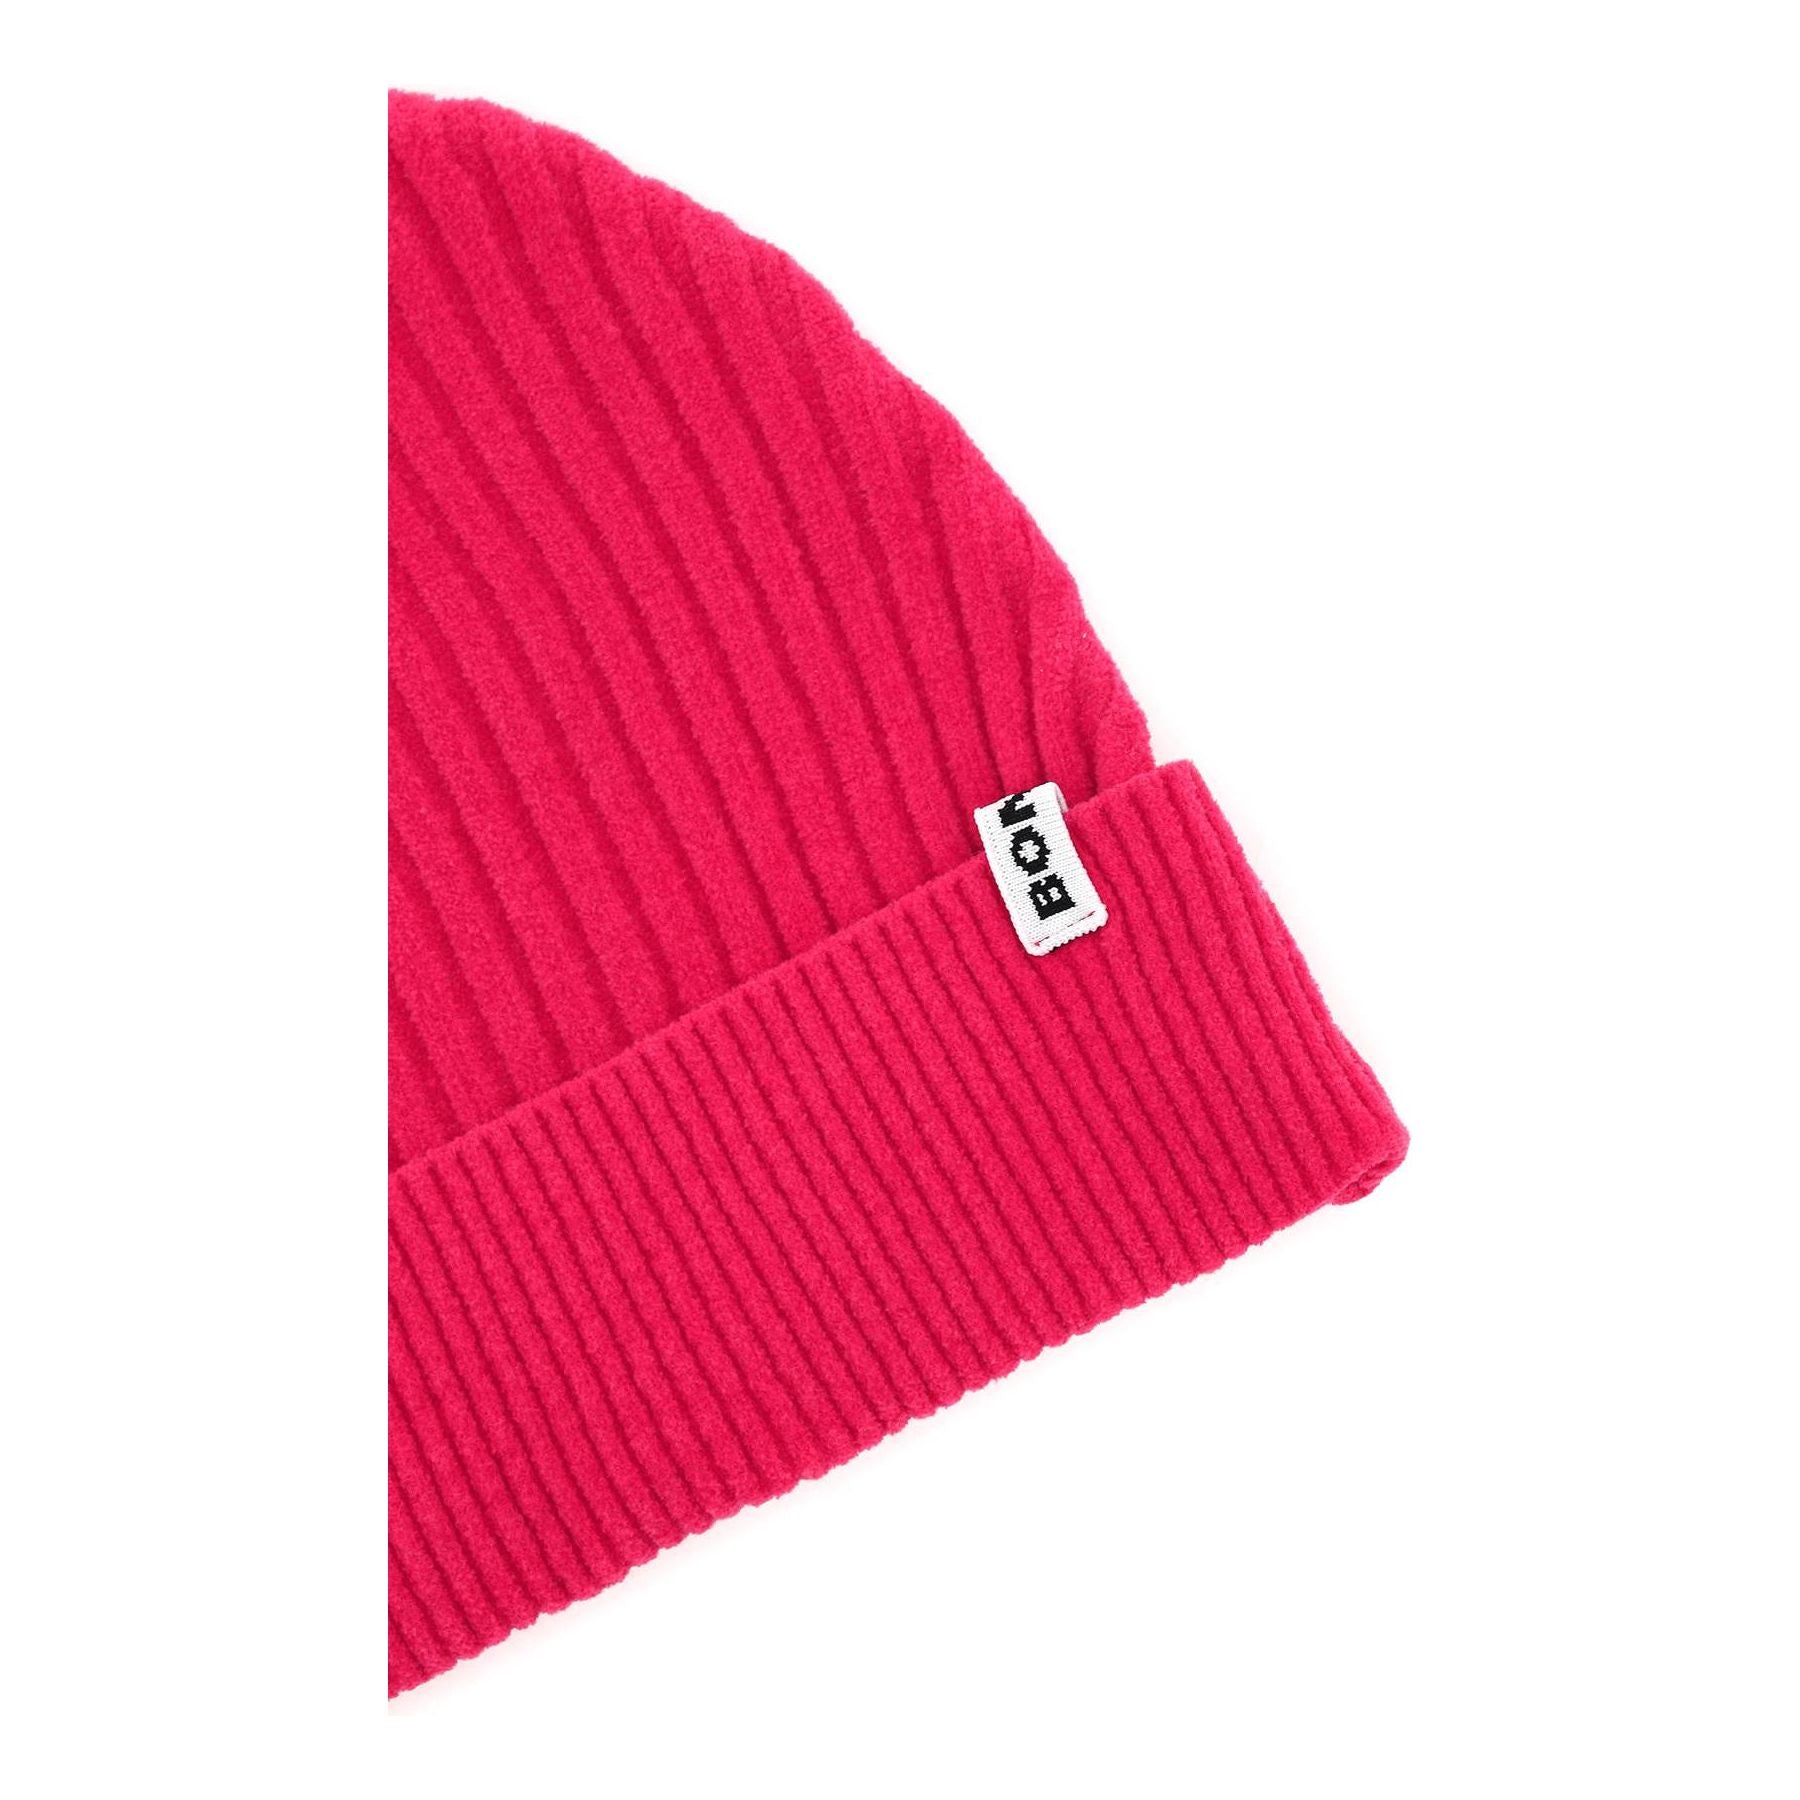 Ribbed Cotton-Blend Beanie Hat